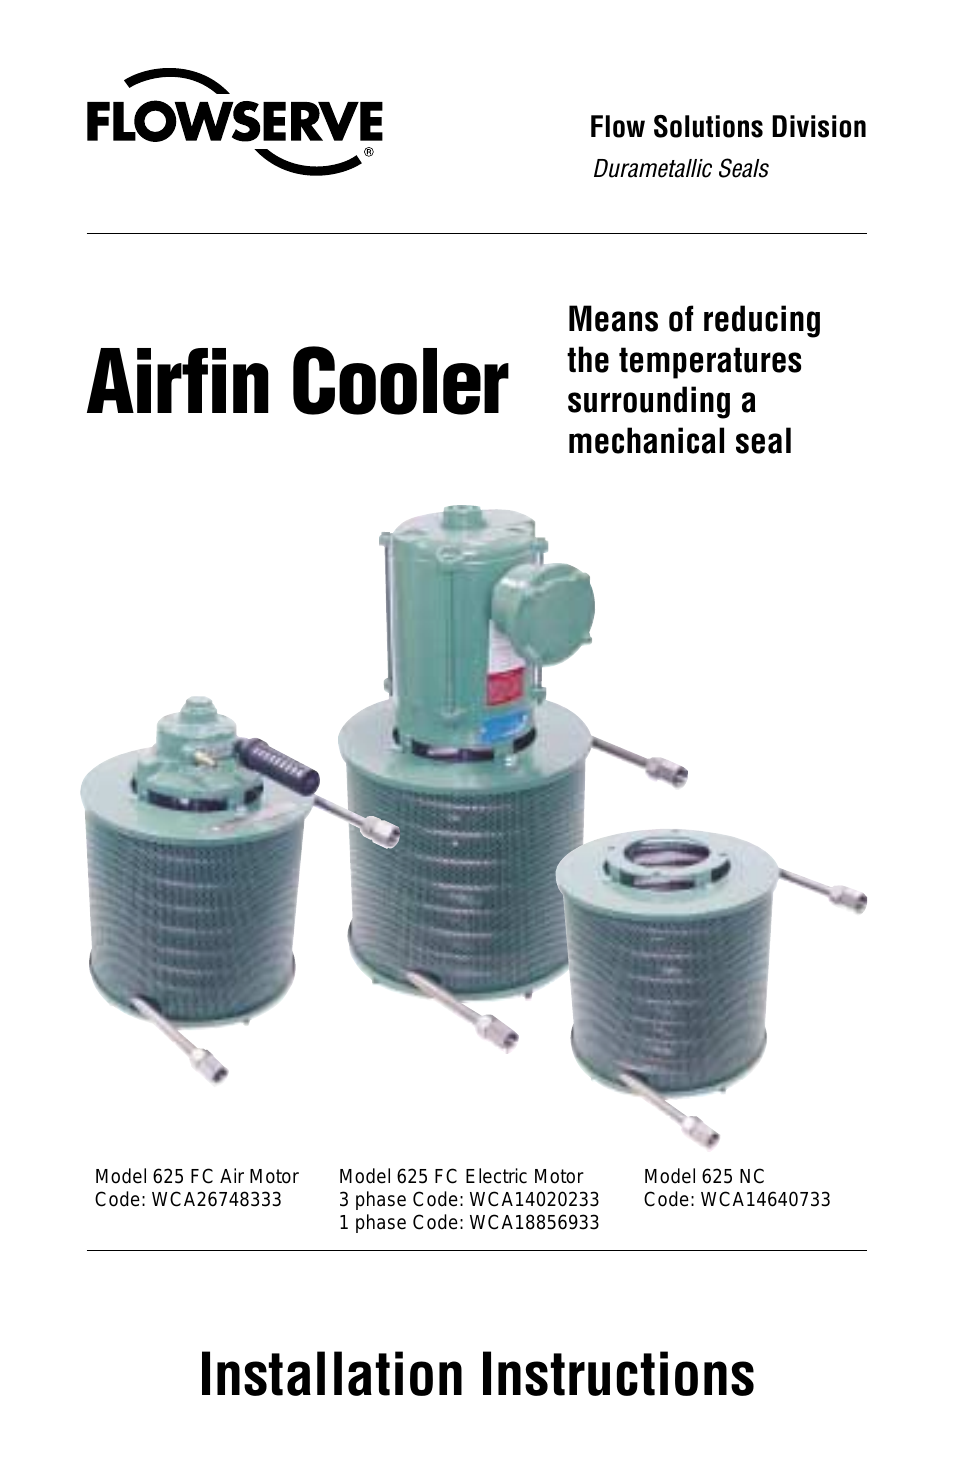 Airfin Coolers